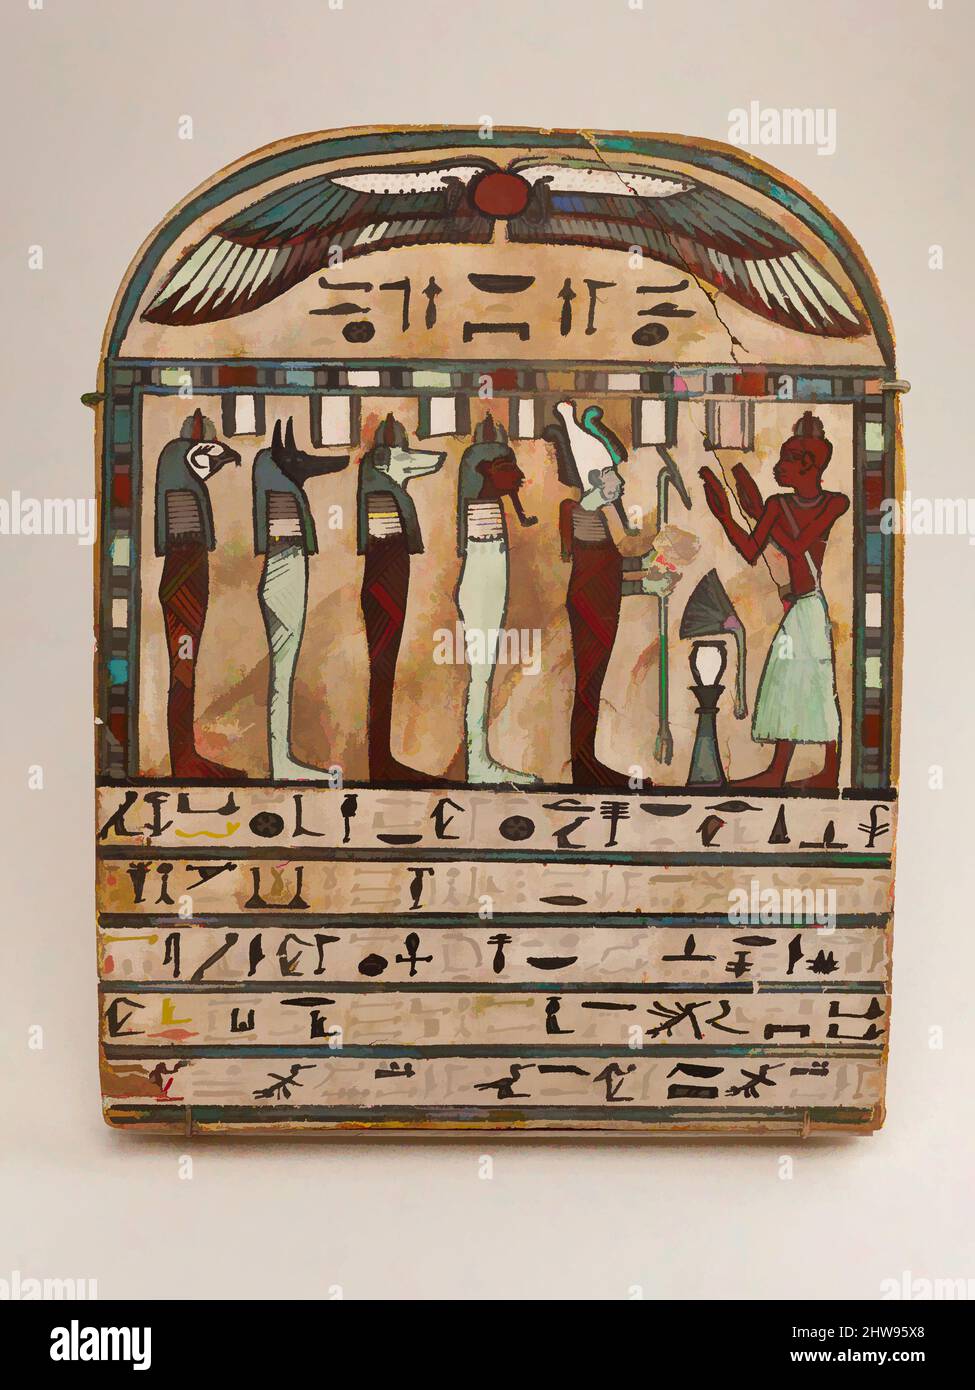 Art inspired by Stela of the God's-Father of Amun Pakeshi, Third Intermediate Period–Saite Period, Dynasty 25–26, ca. 750–525 B.C., From Egypt, Wood, gesso, paint, 36.6 x 29 cm (14 7/16 x 11 7/16 in.), As part of the burial equipment, funerary stelae made a prayer for offerings for the, Classic works modernized by Artotop with a splash of modernity. Shapes, color and value, eye-catching visual impact on art. Emotions through freedom of artworks in a contemporary way. A timeless message pursuing a wildly creative new direction. Artists turning to the digital medium and creating the Artotop NFT Stock Photo